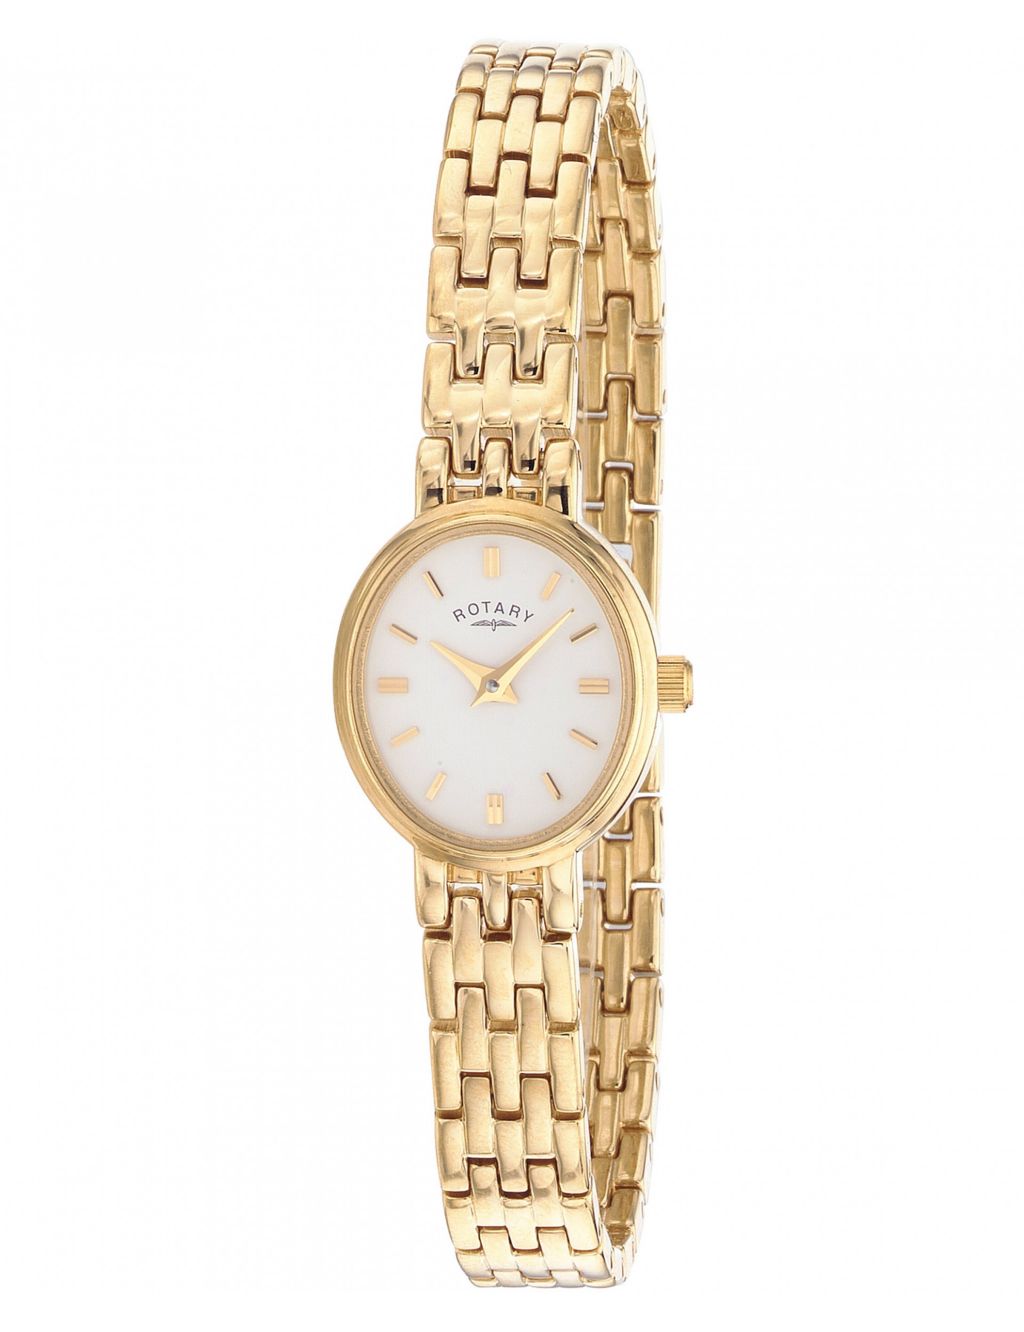 Rotary Balmoral Gold Stainless Steel Quartz Watch image 1